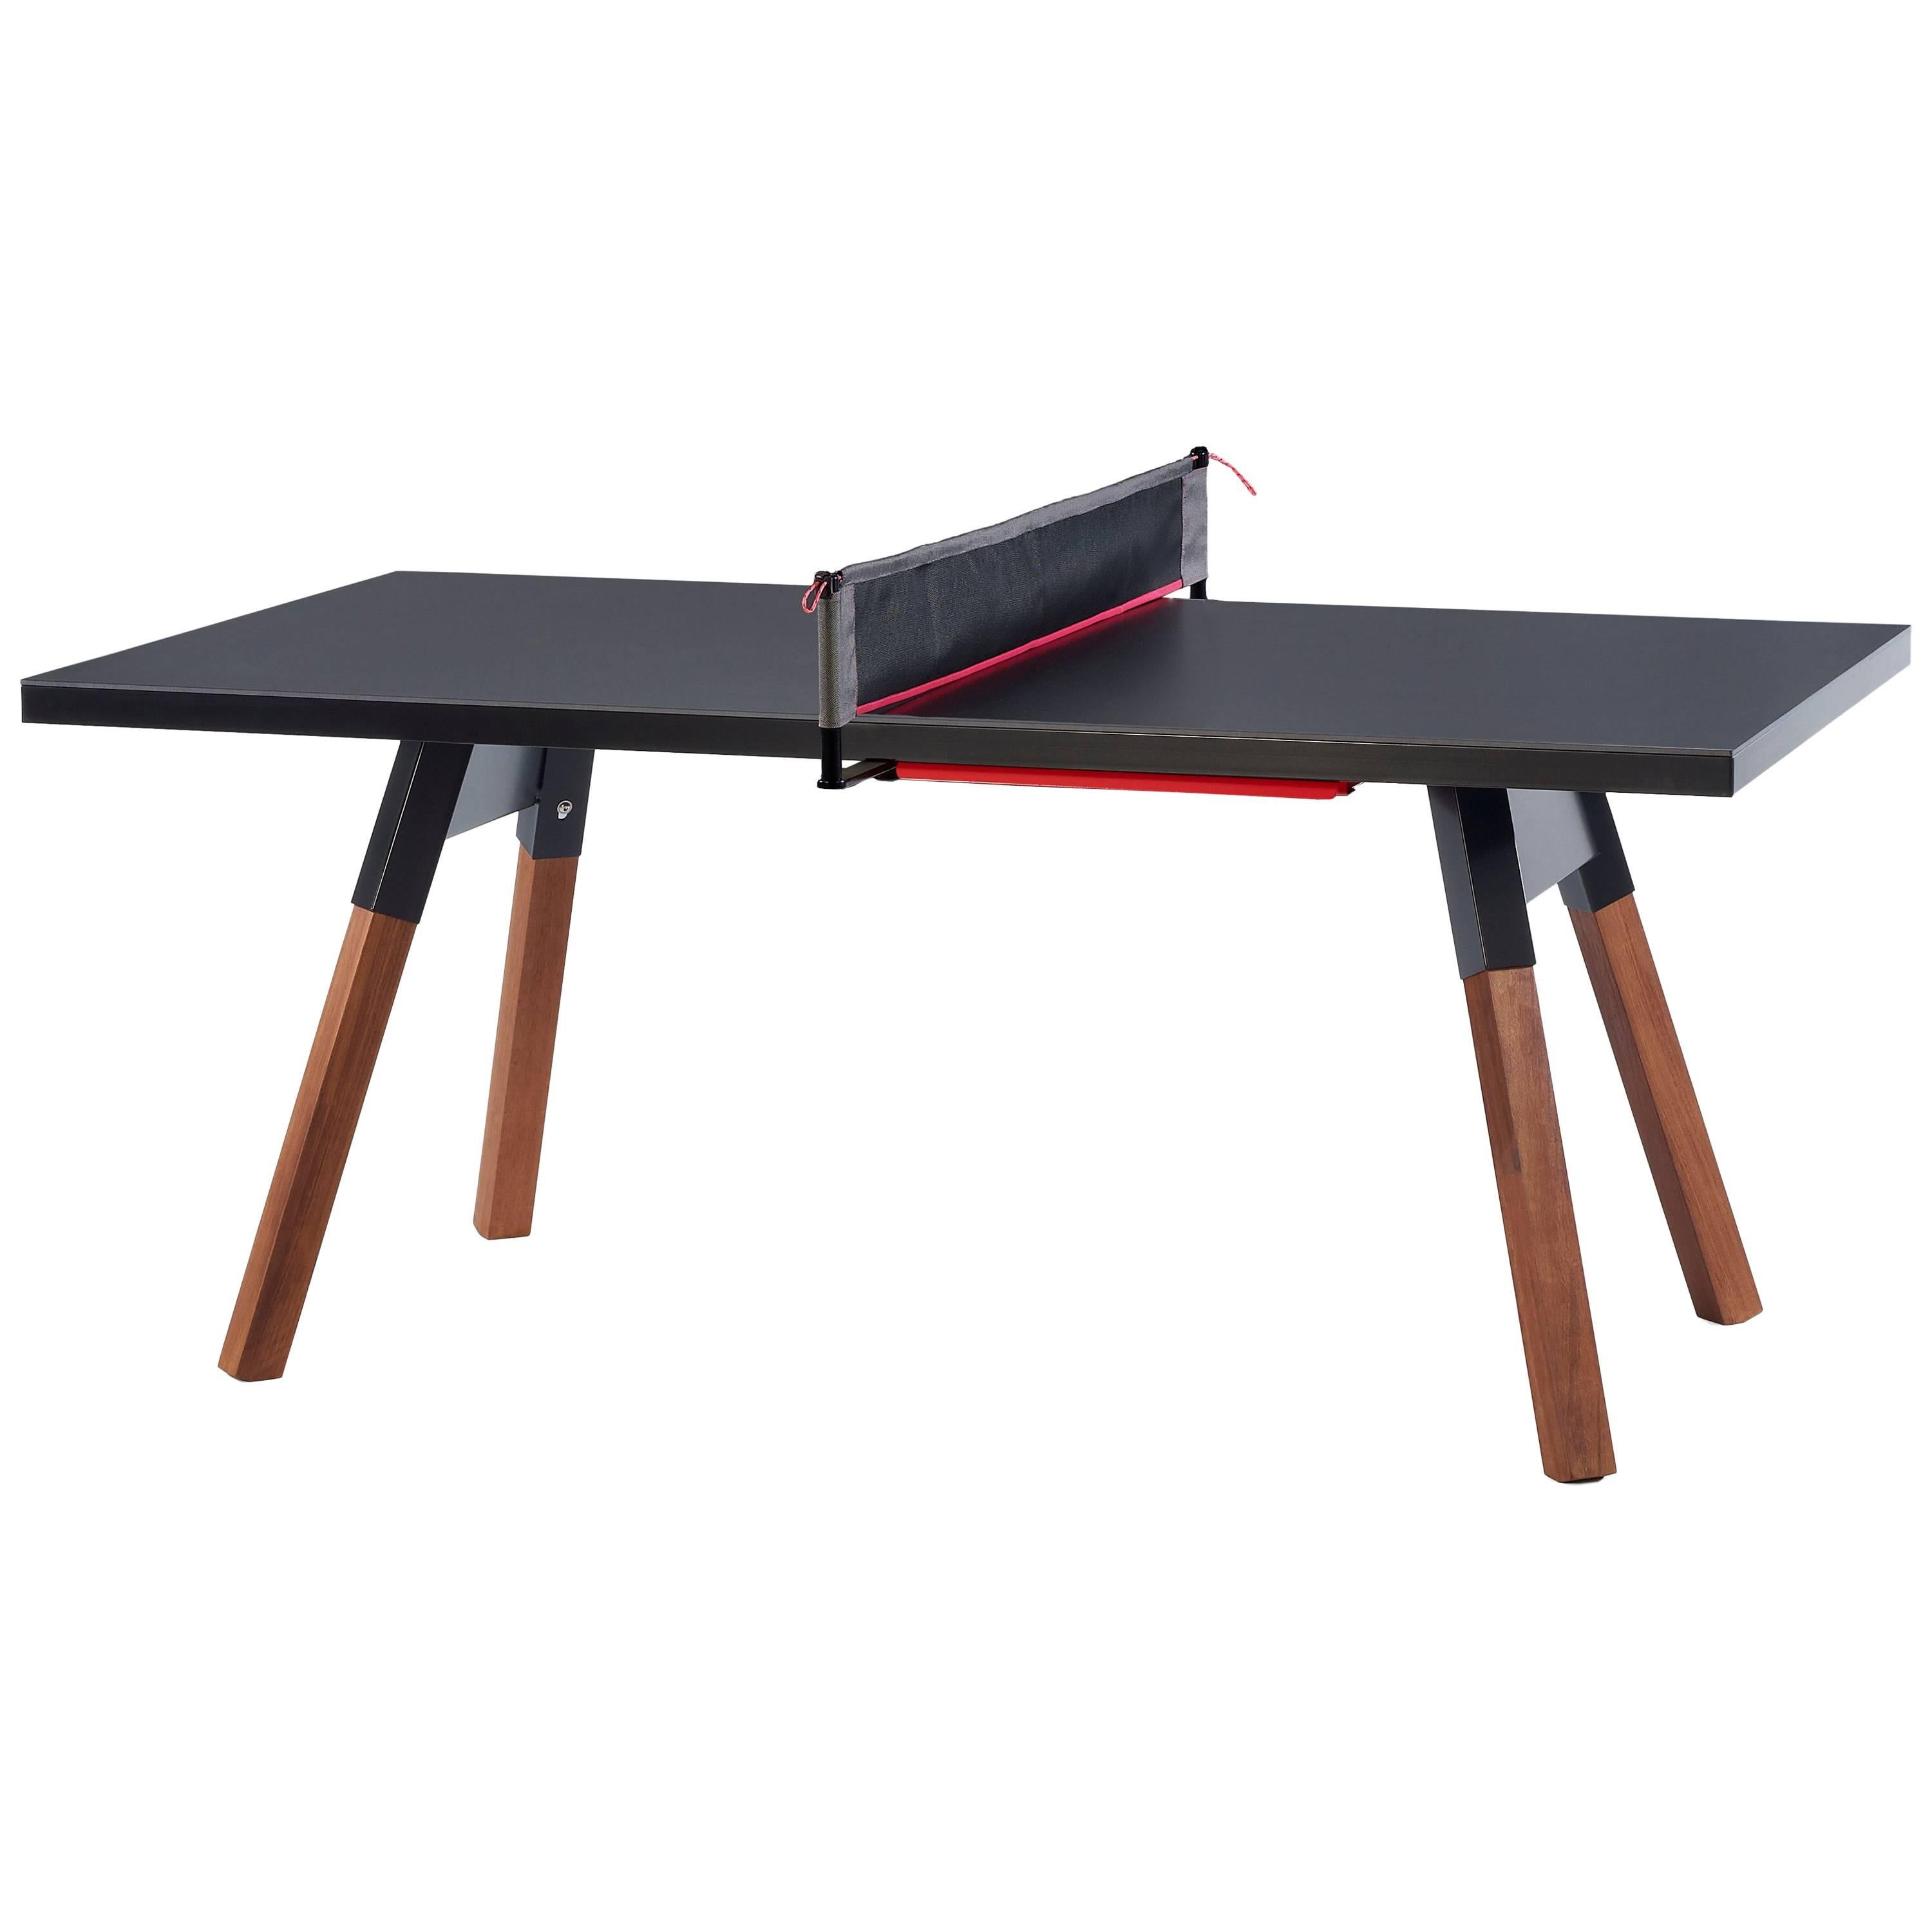 You and Me HPL Top Ping-Pong Table 180 in Black by RS Barcelona For Sale